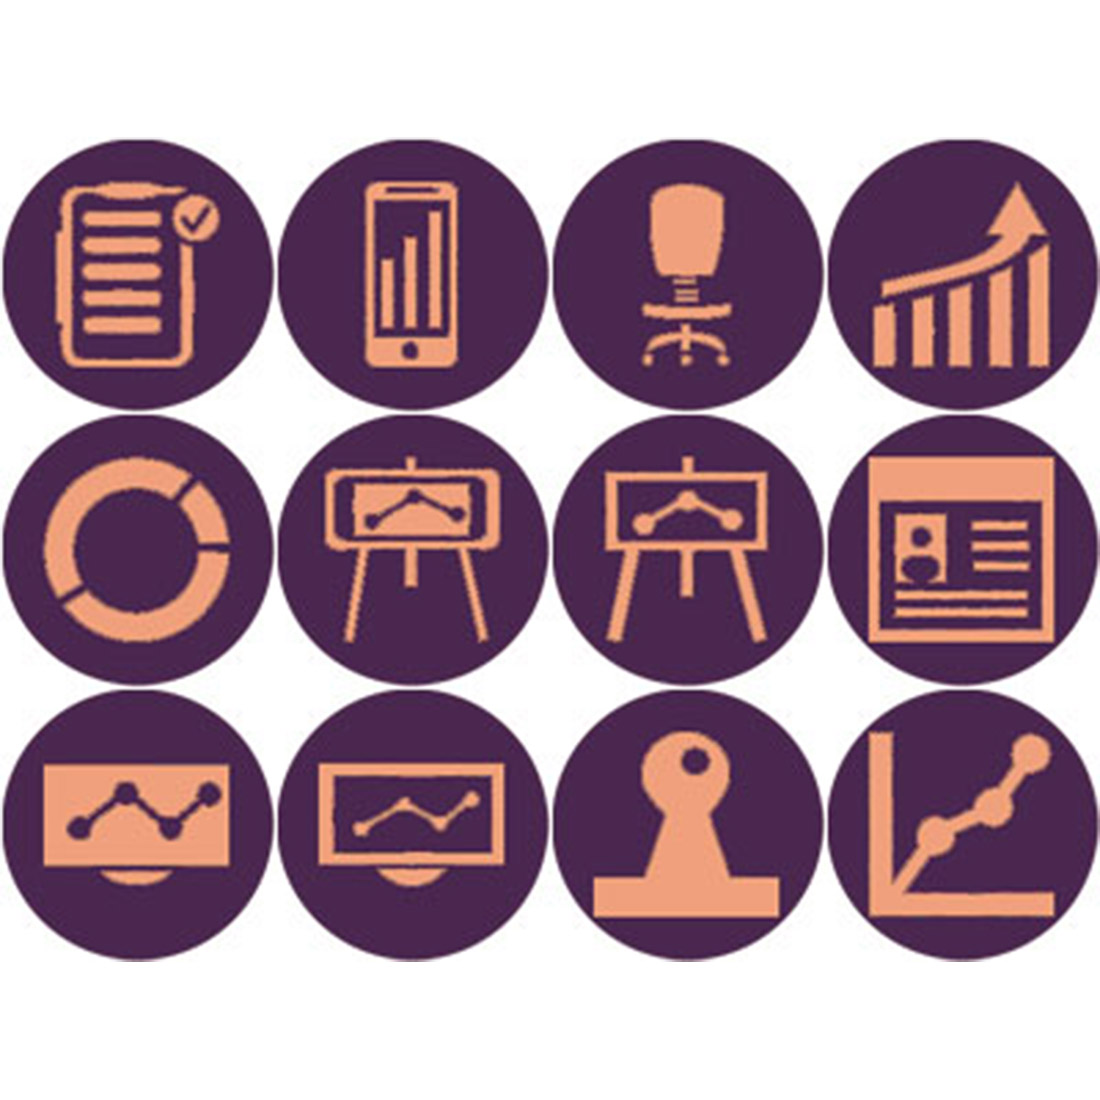 ORANGE AND PURPLE BUSINESS ROUND ICONS cover image.